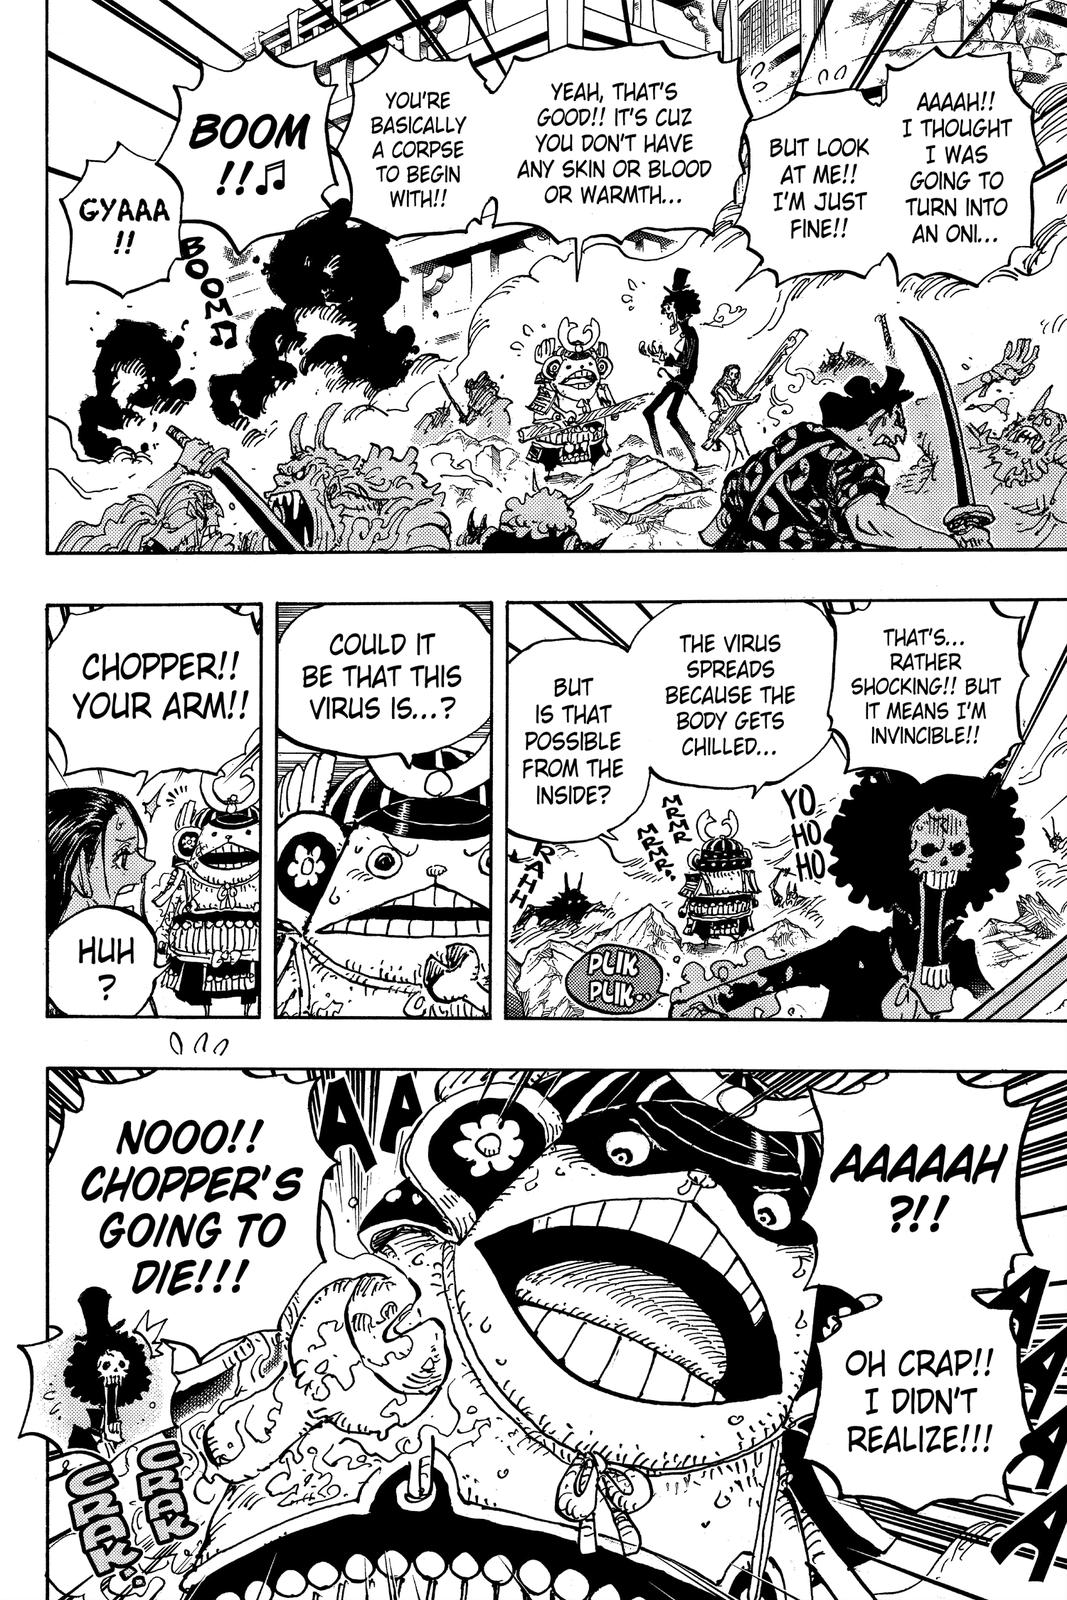 One Piece, Chapter 995 image 17